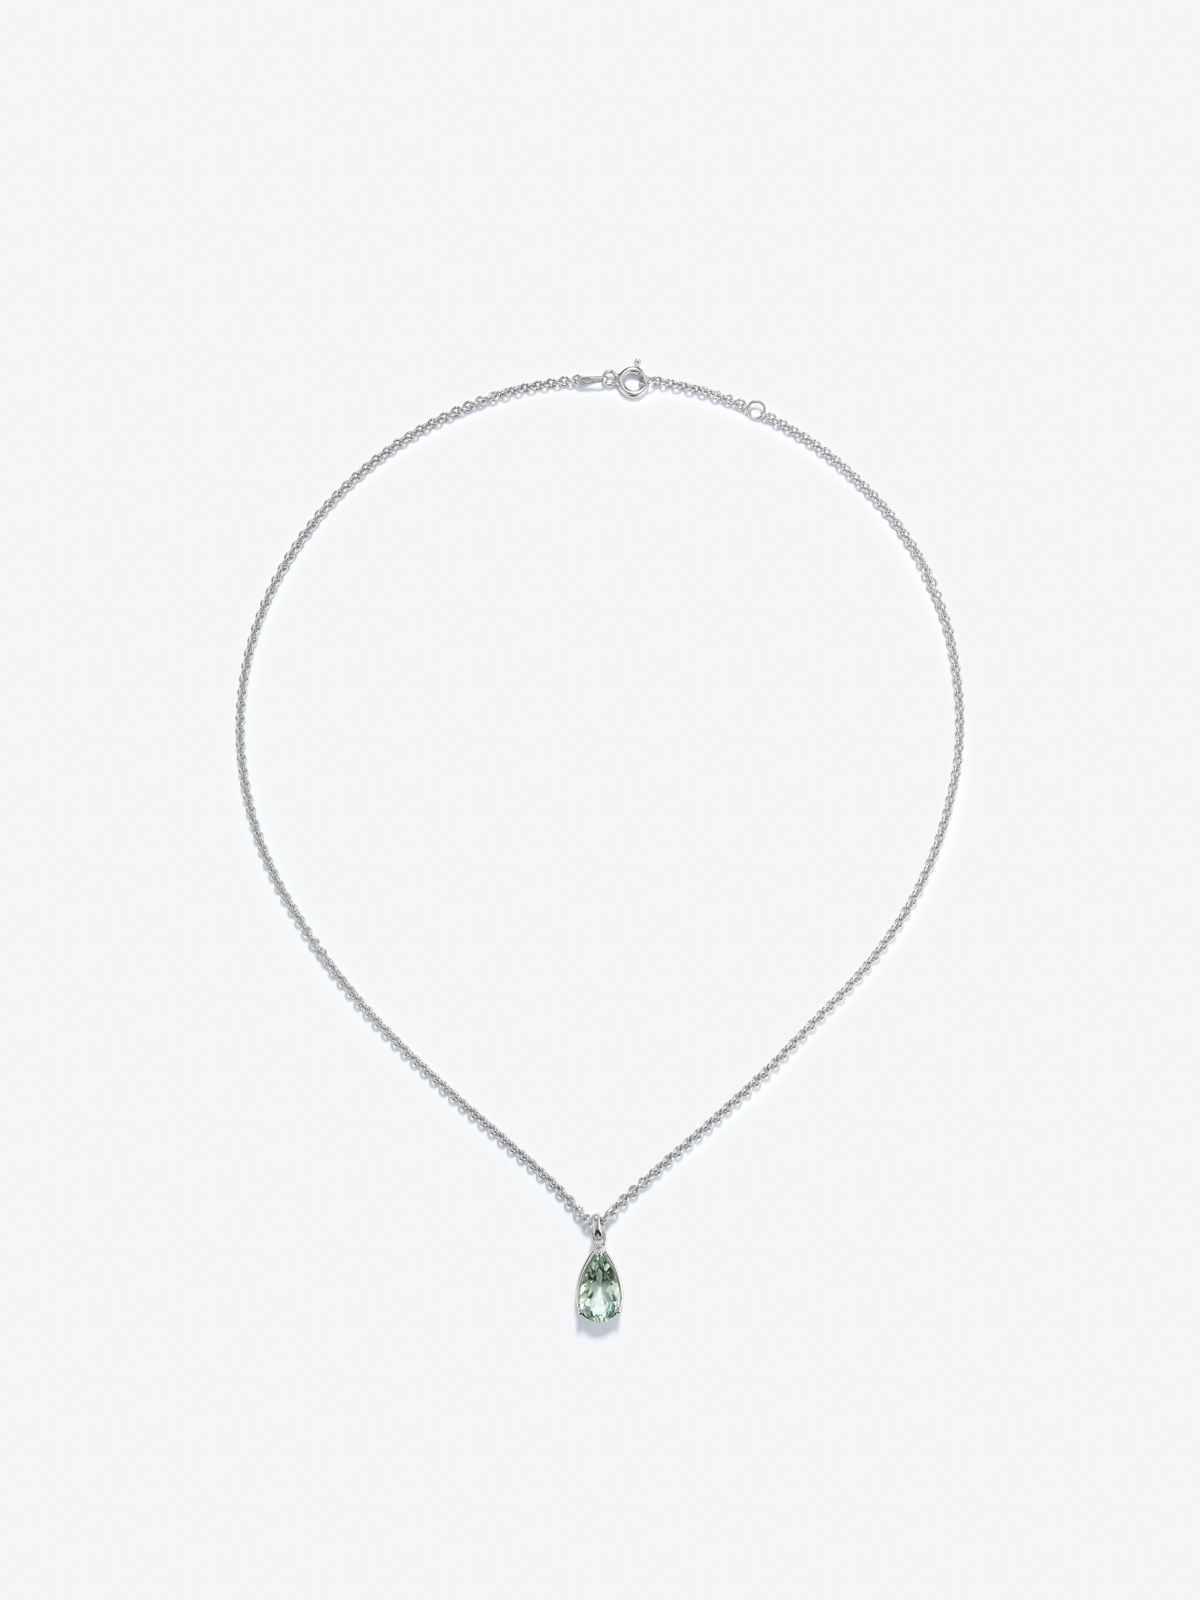 925 silver chain pendant with green amethyst